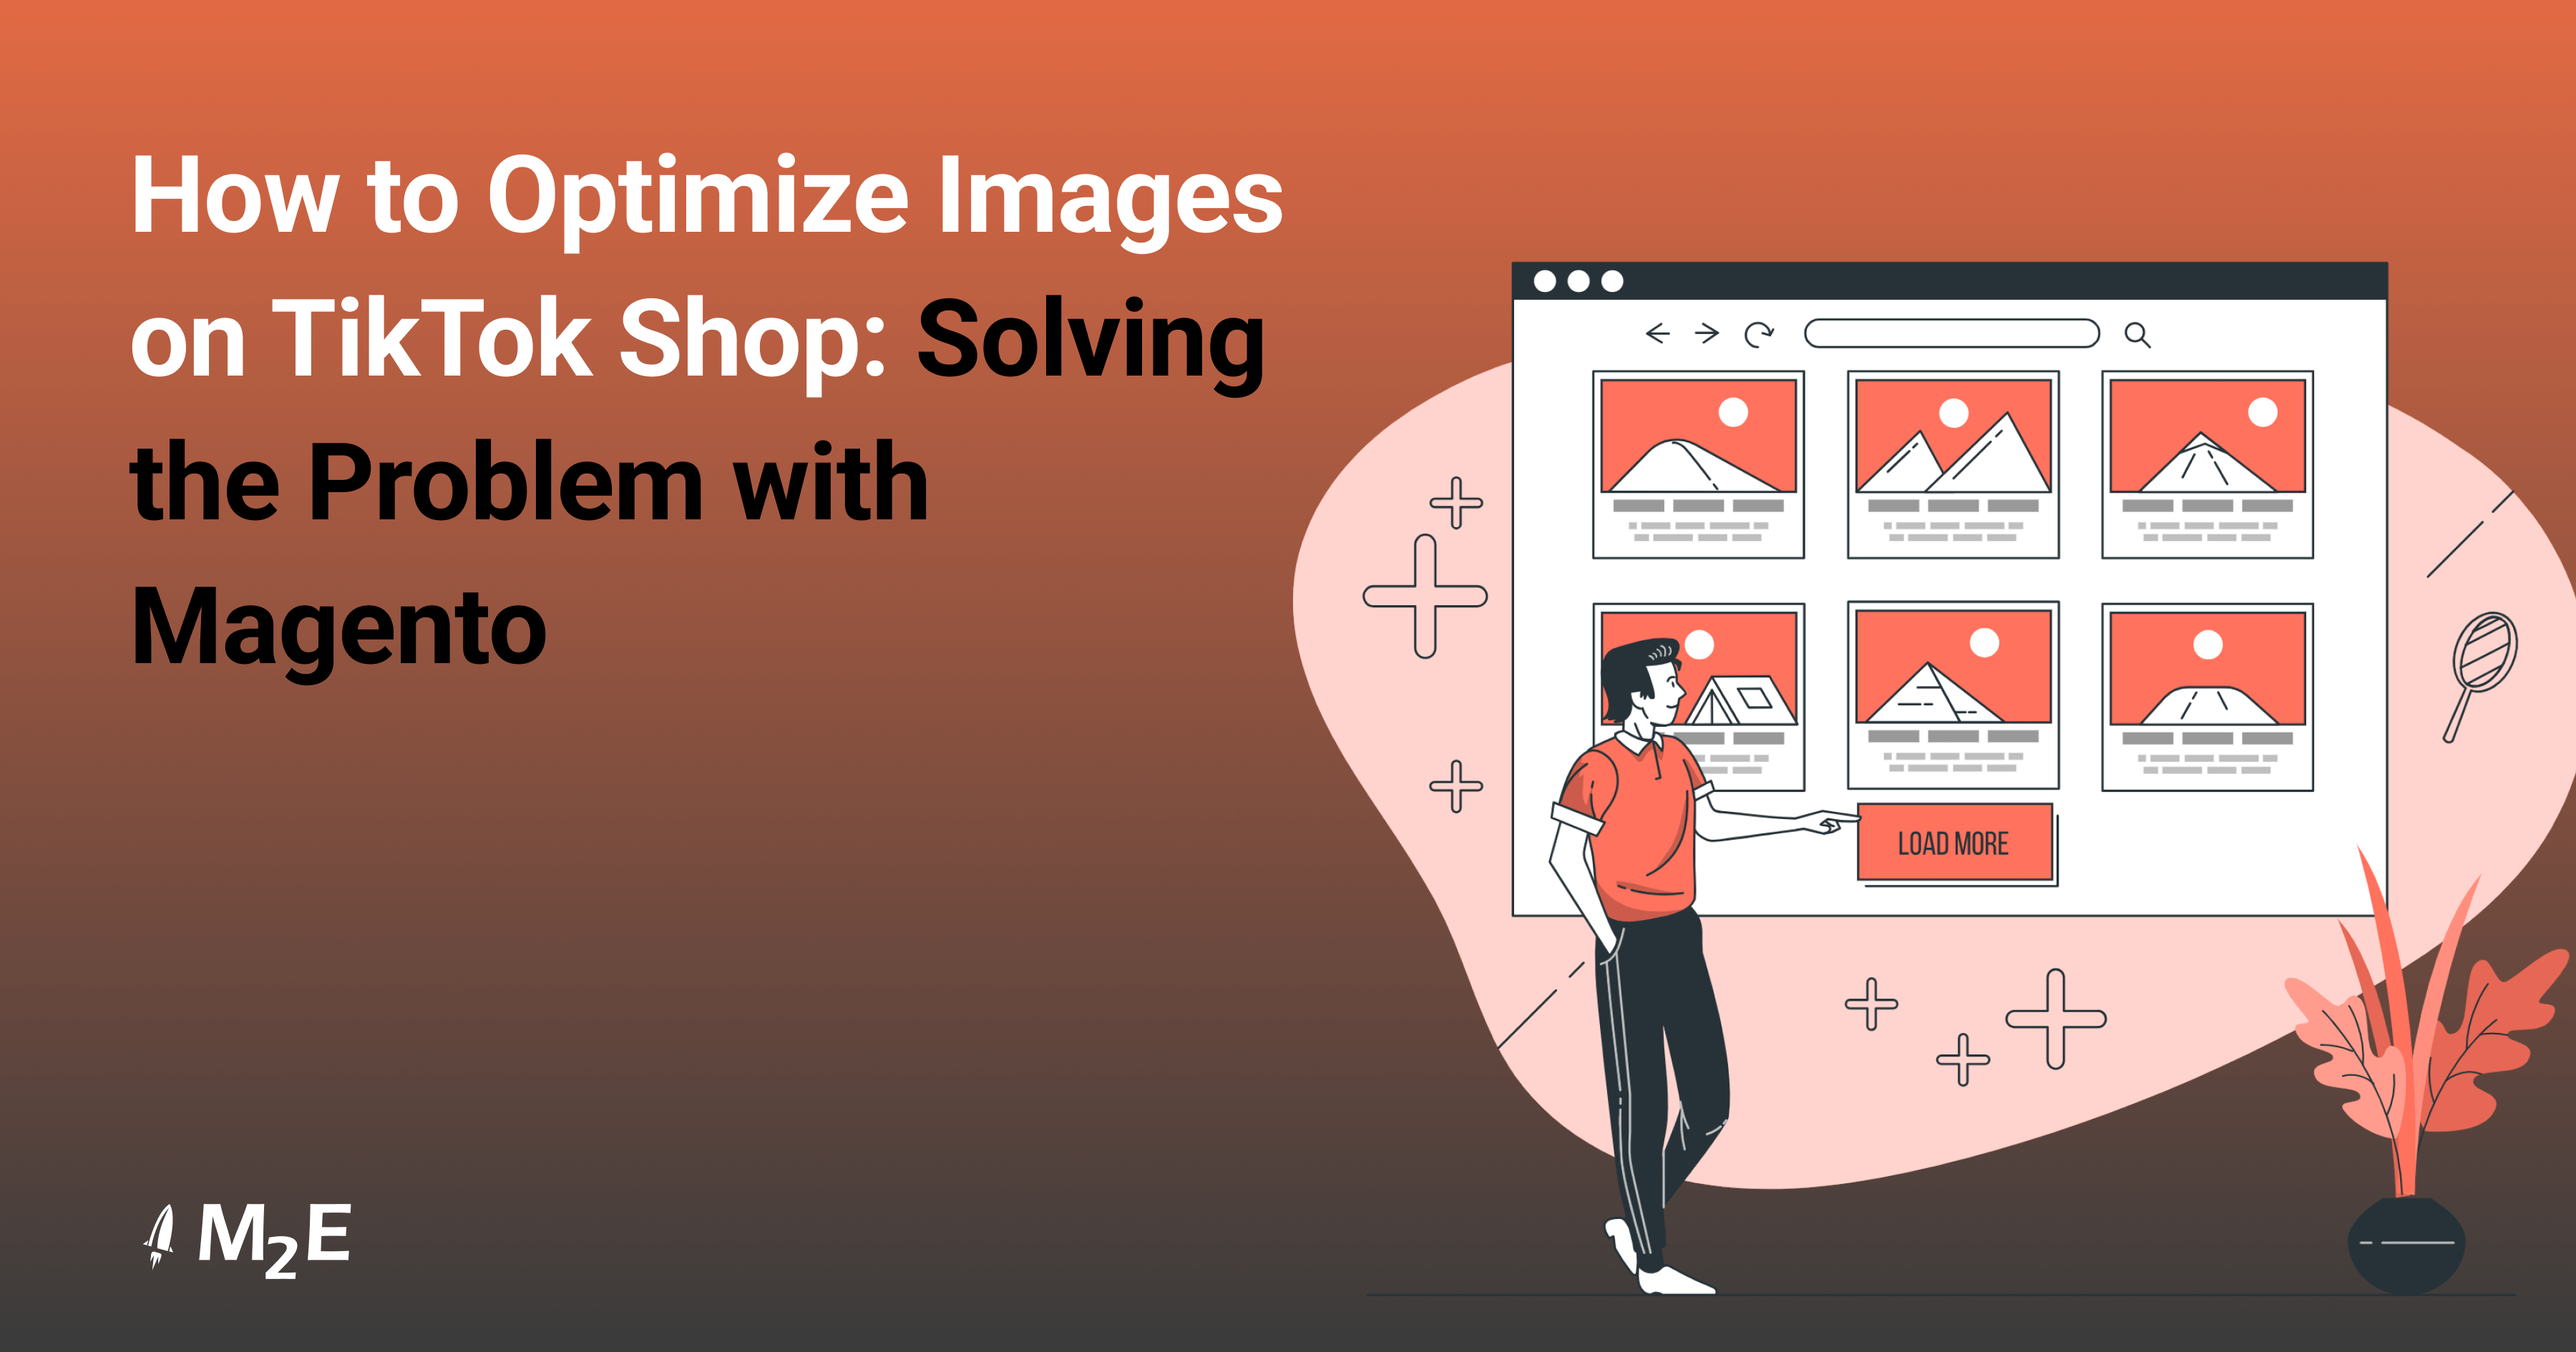 How to Optimize Images on TikTok Shop: Solving The Problem with Magento